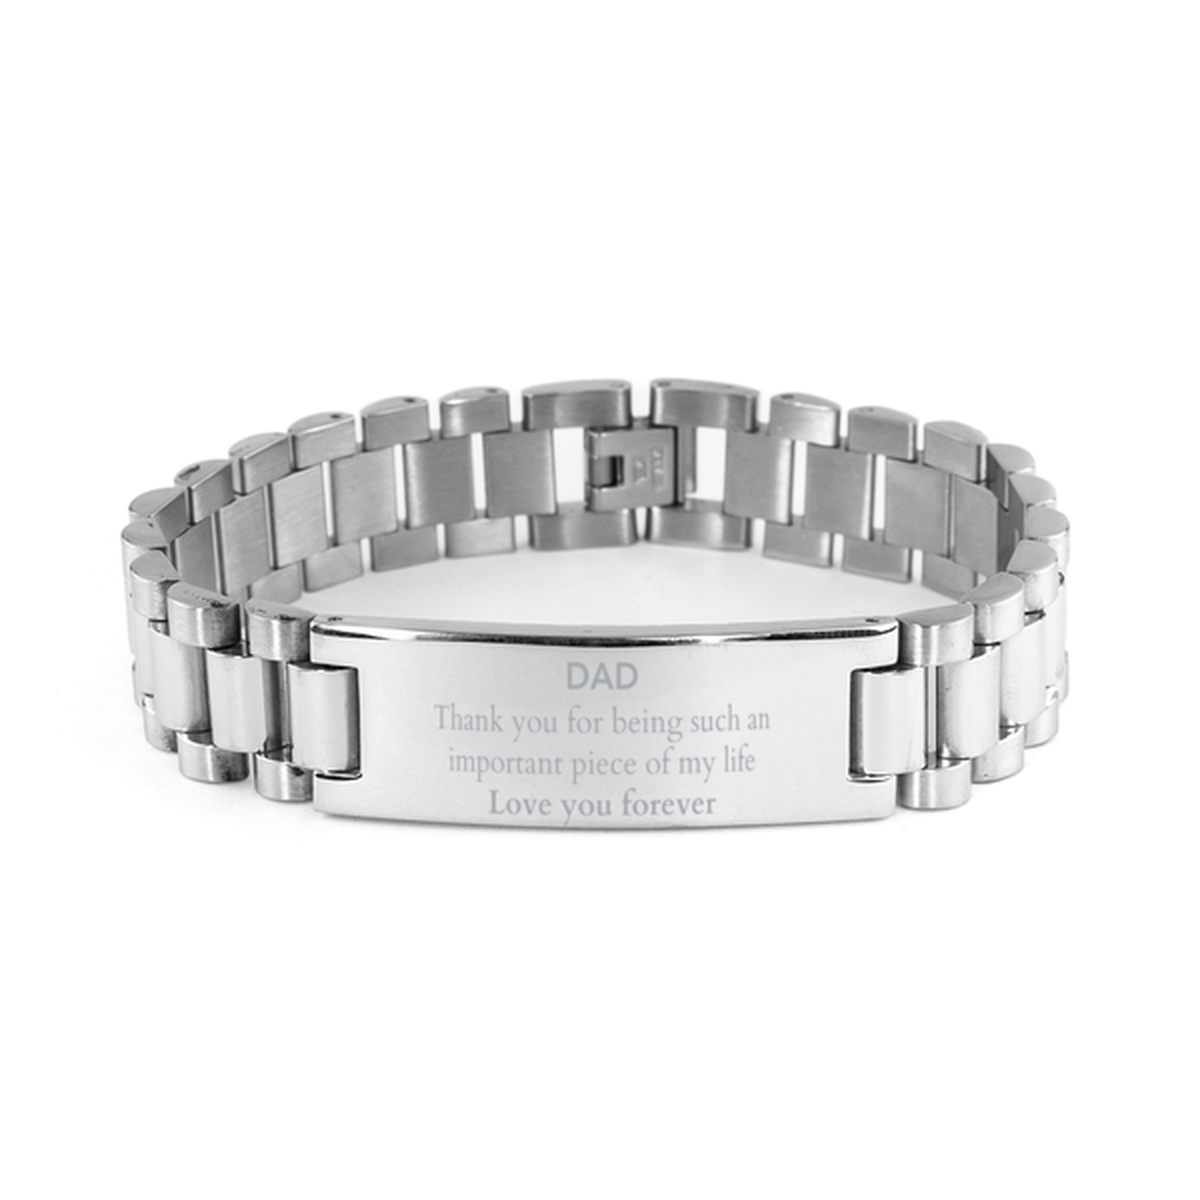 Appropriate Dad Ladder Stainless Steel Bracelet Epic Birthday Gifts for Dad Thank you for being such an important piece of my life Dad Christmas Mothers Fathers Day